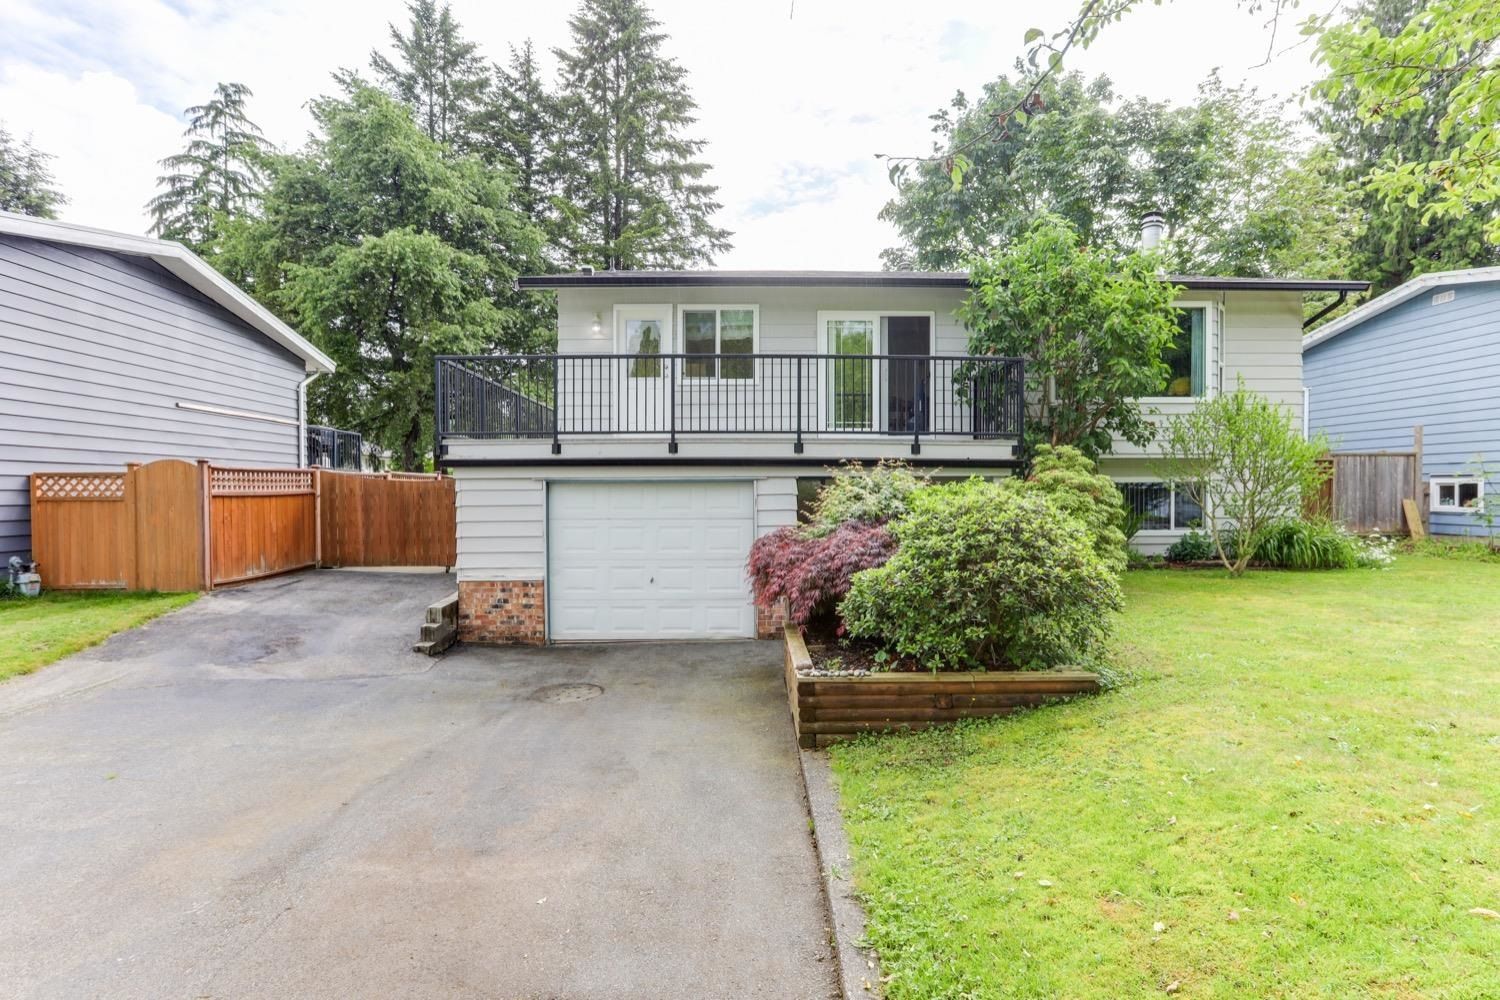 We have just sold a property at 11618 211 ST in Maple Ridge